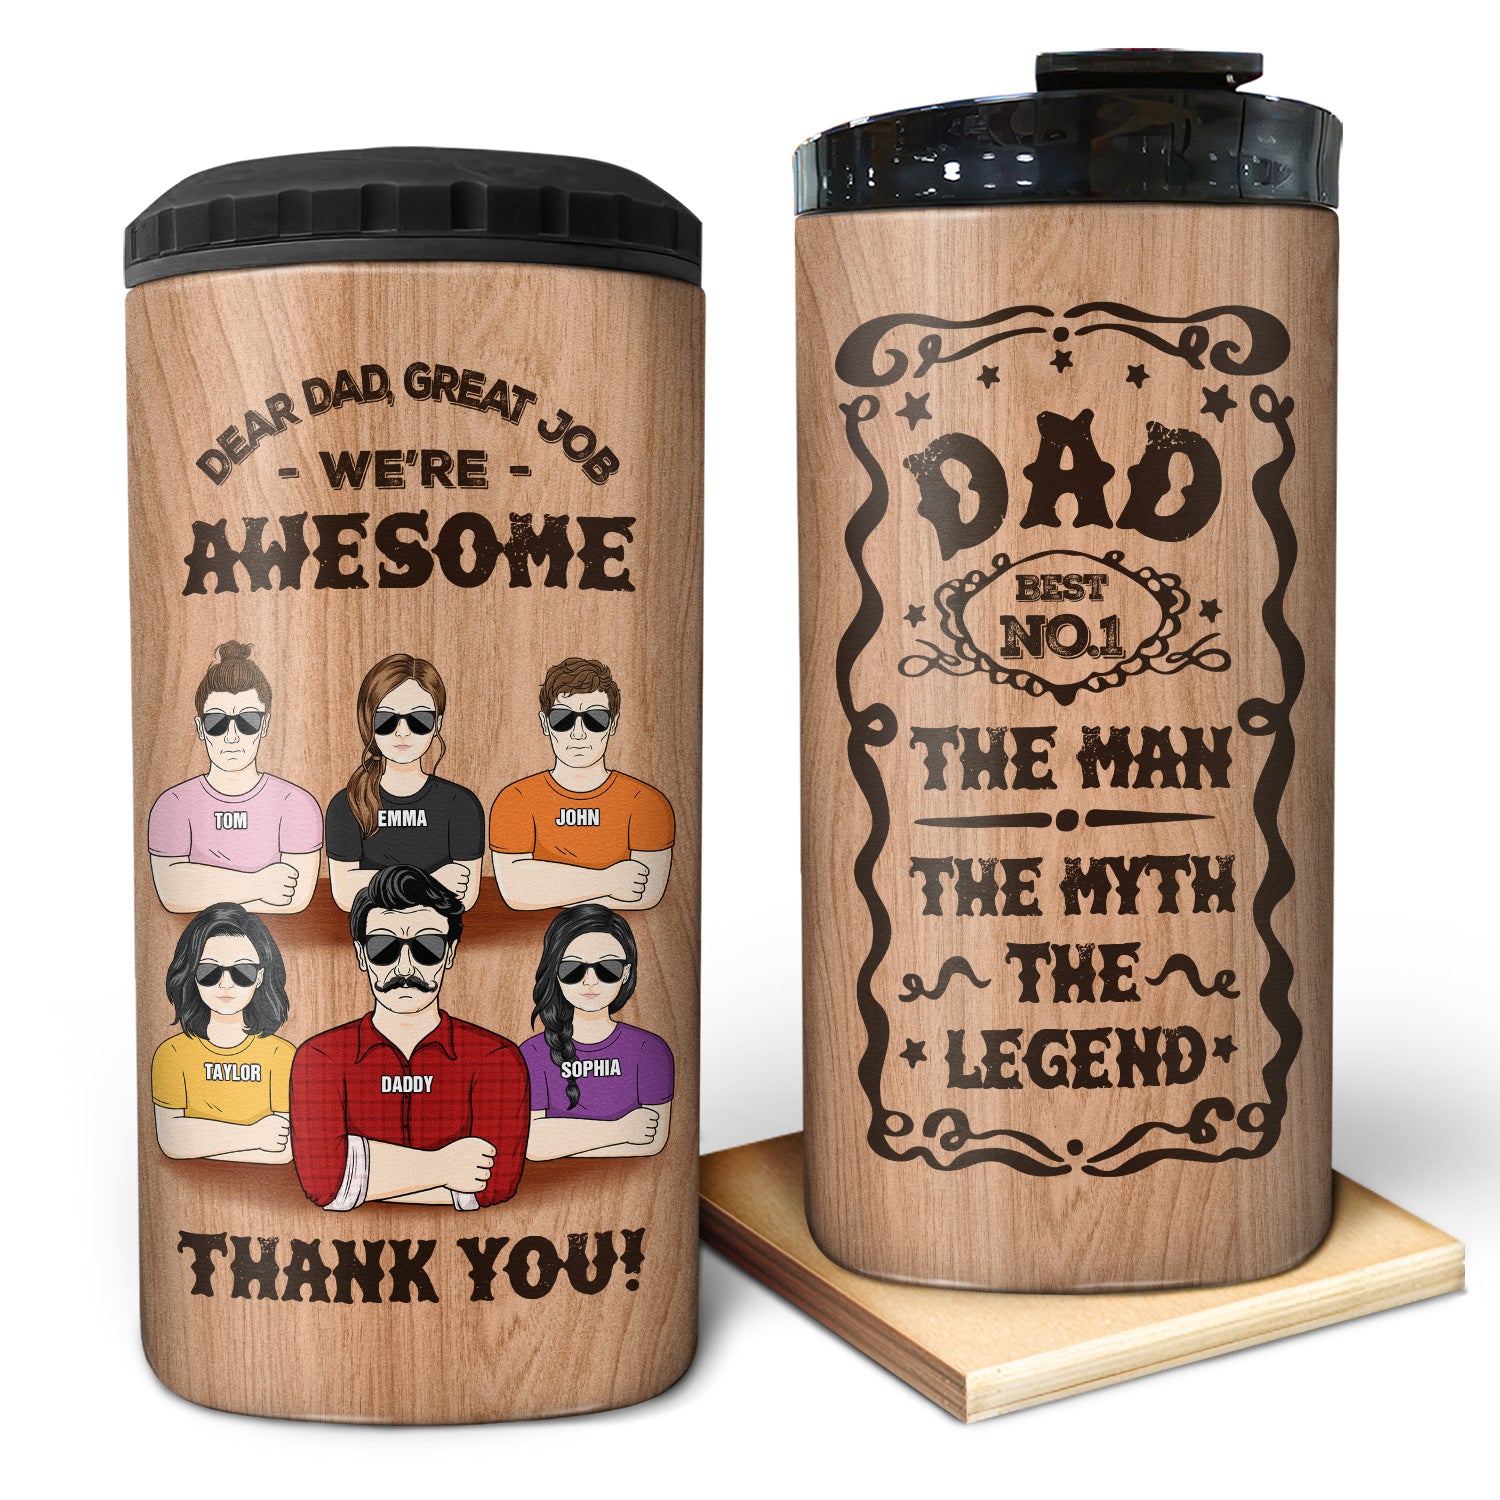 Best Dad The Man The Myth The Legend - Birthday, Loving Gift For Daddy, Father, Grandpa, Grandfather, Daughters, Sons - Personalized Custom 4 In 1 Can Cooler Tumbler